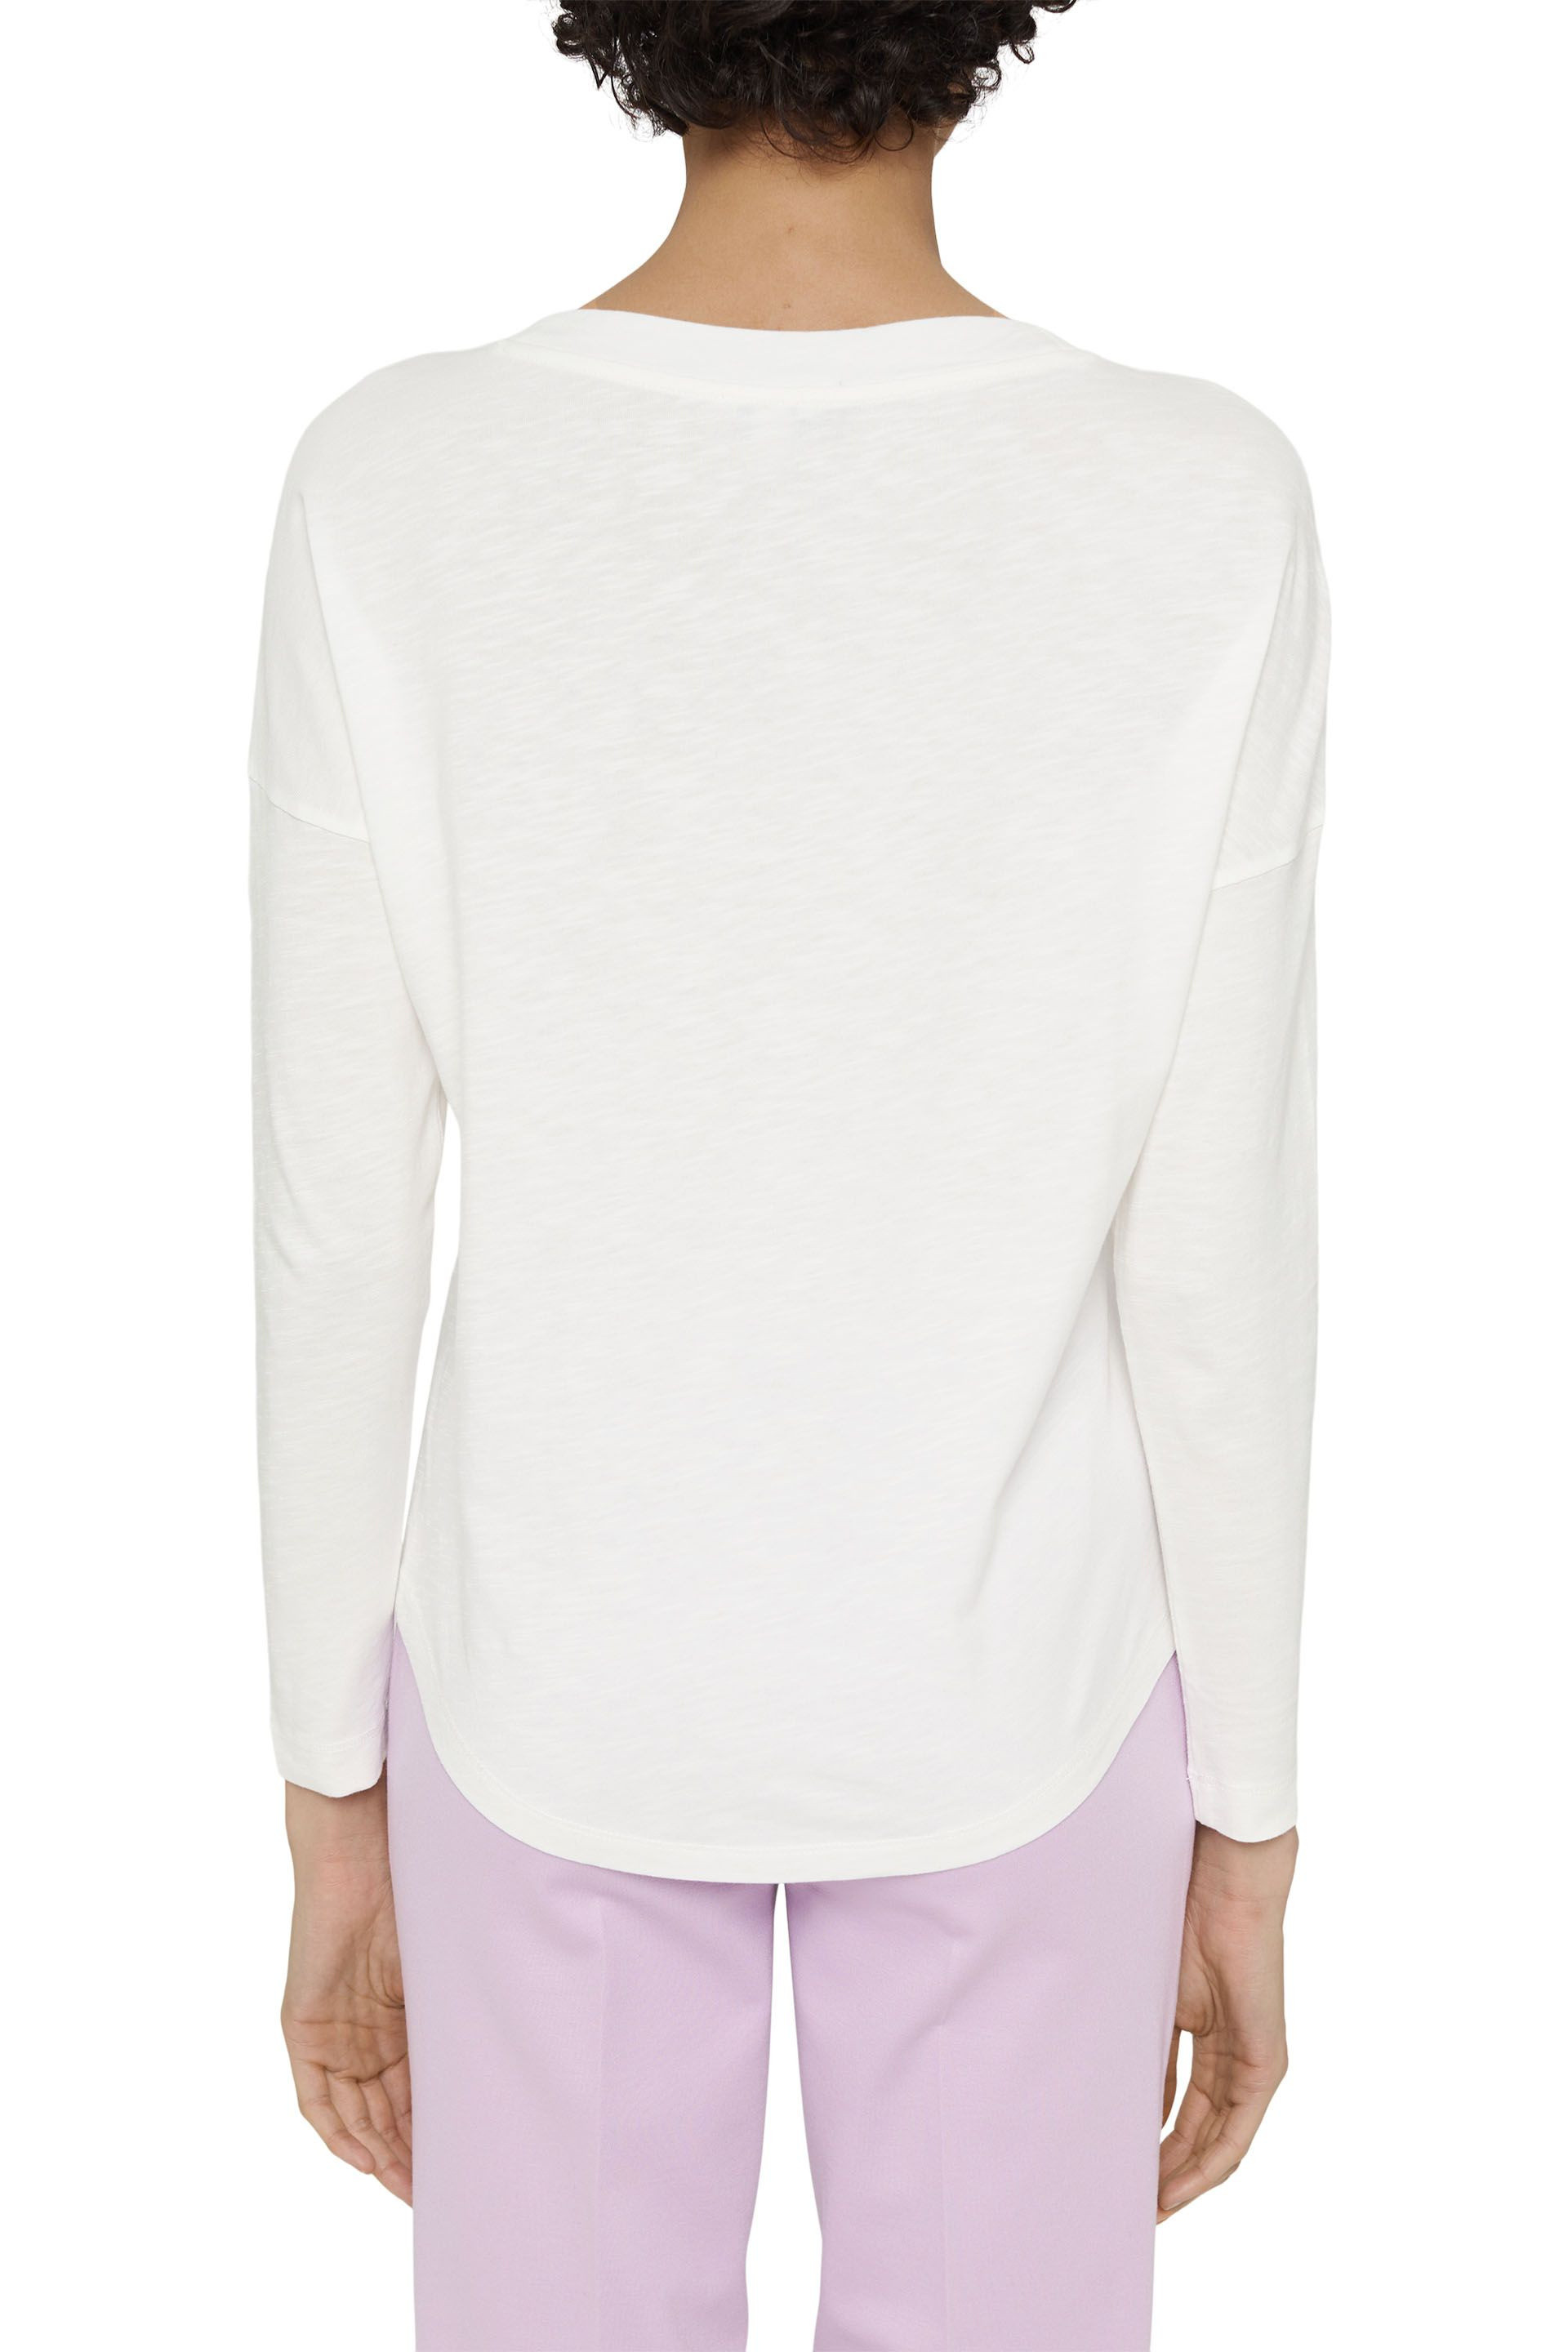 Long-sleeved T-shirt with pocket, White, large image number 2